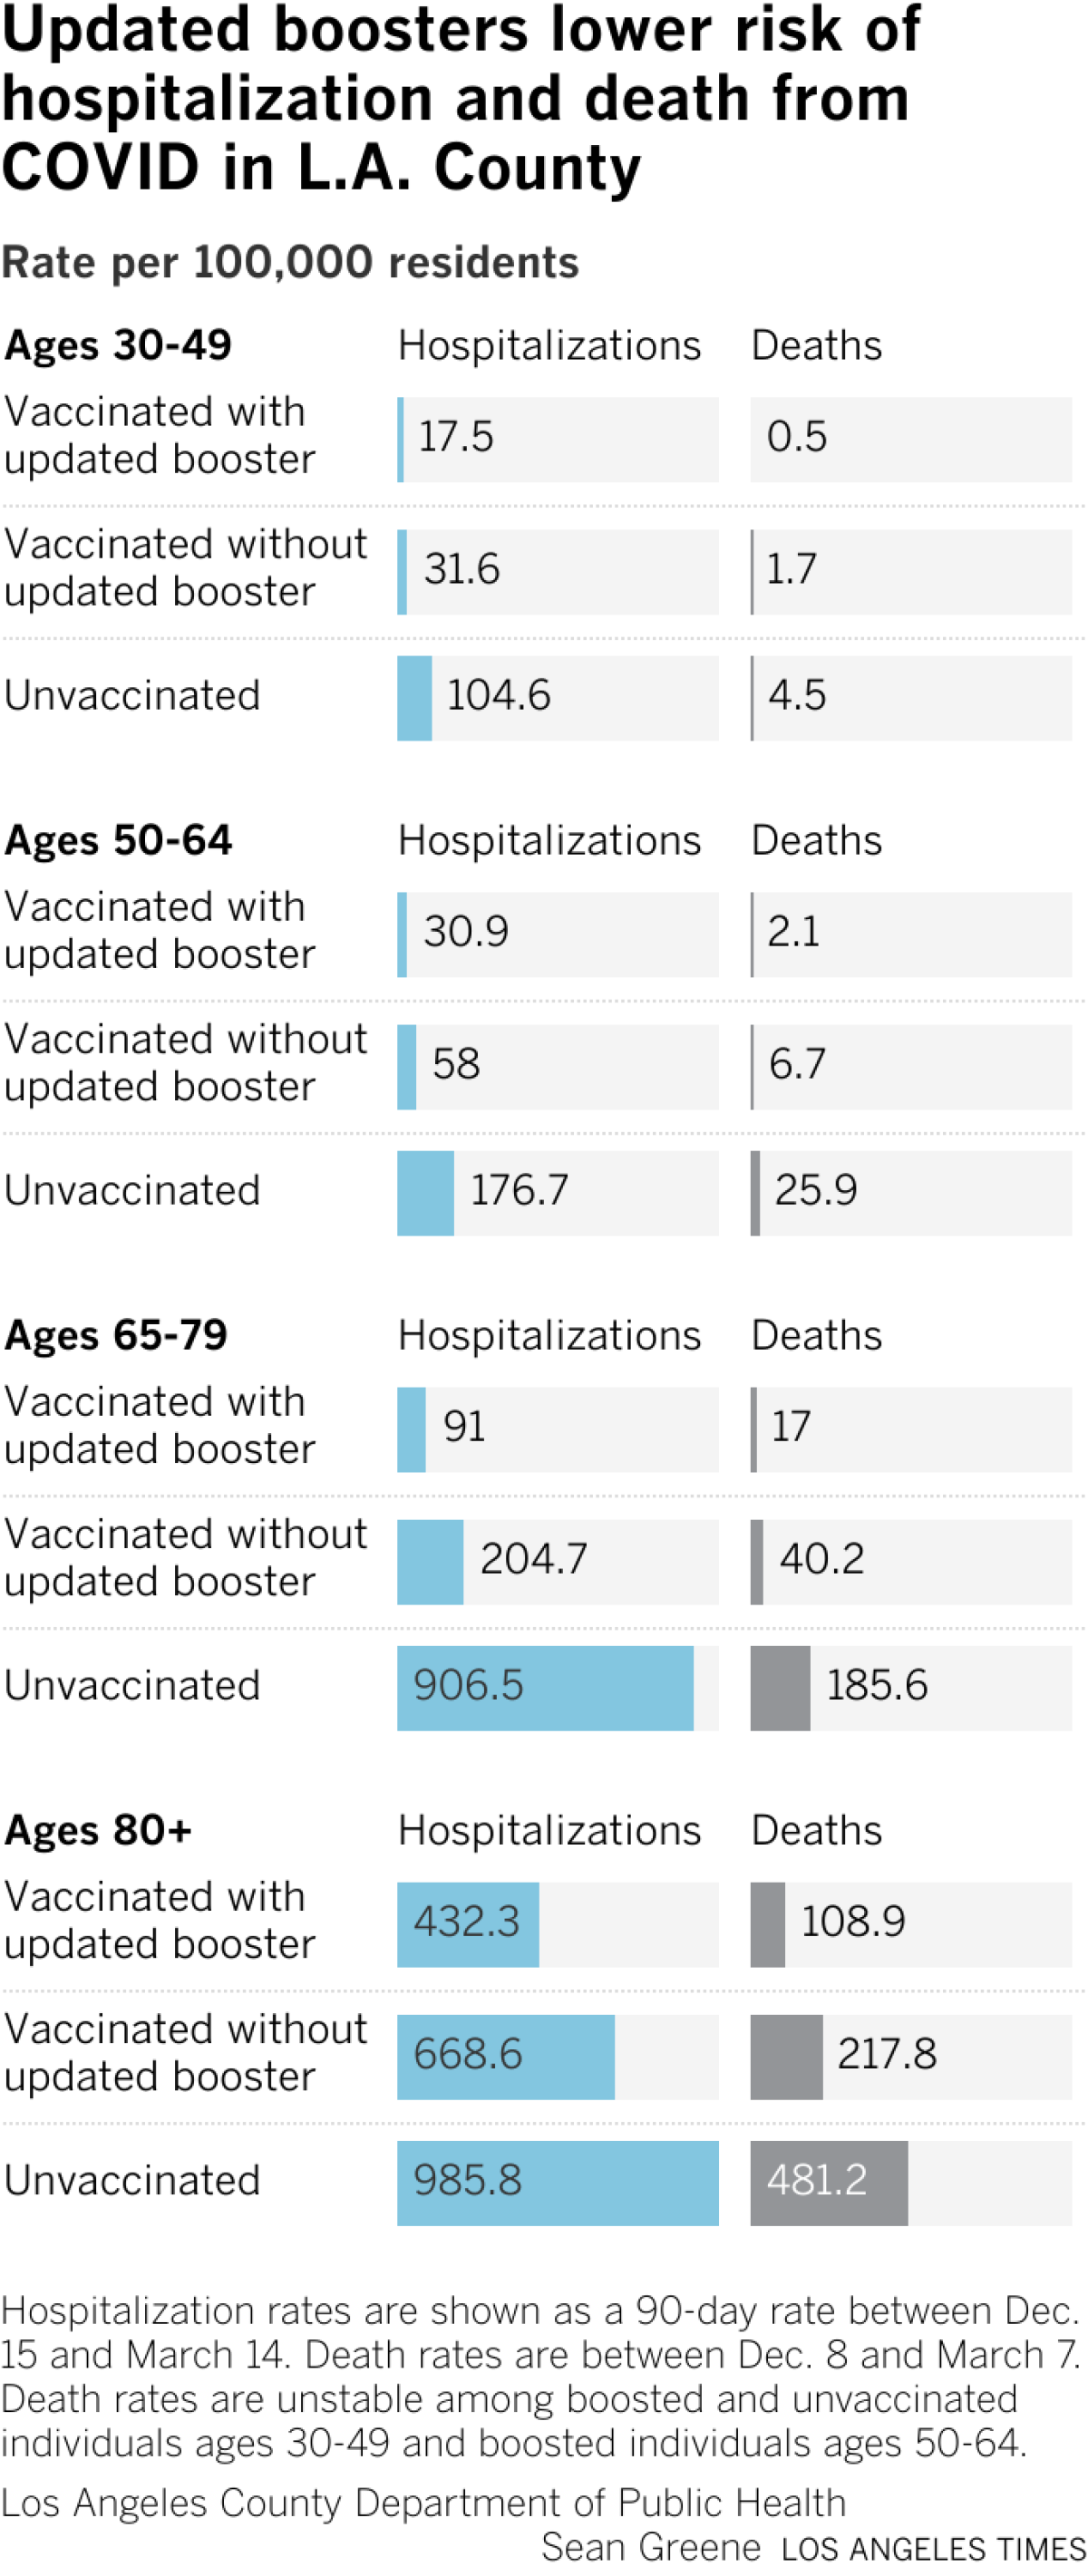 Updated boosters lower risk of hospitalization and death from COVID in L.A. County